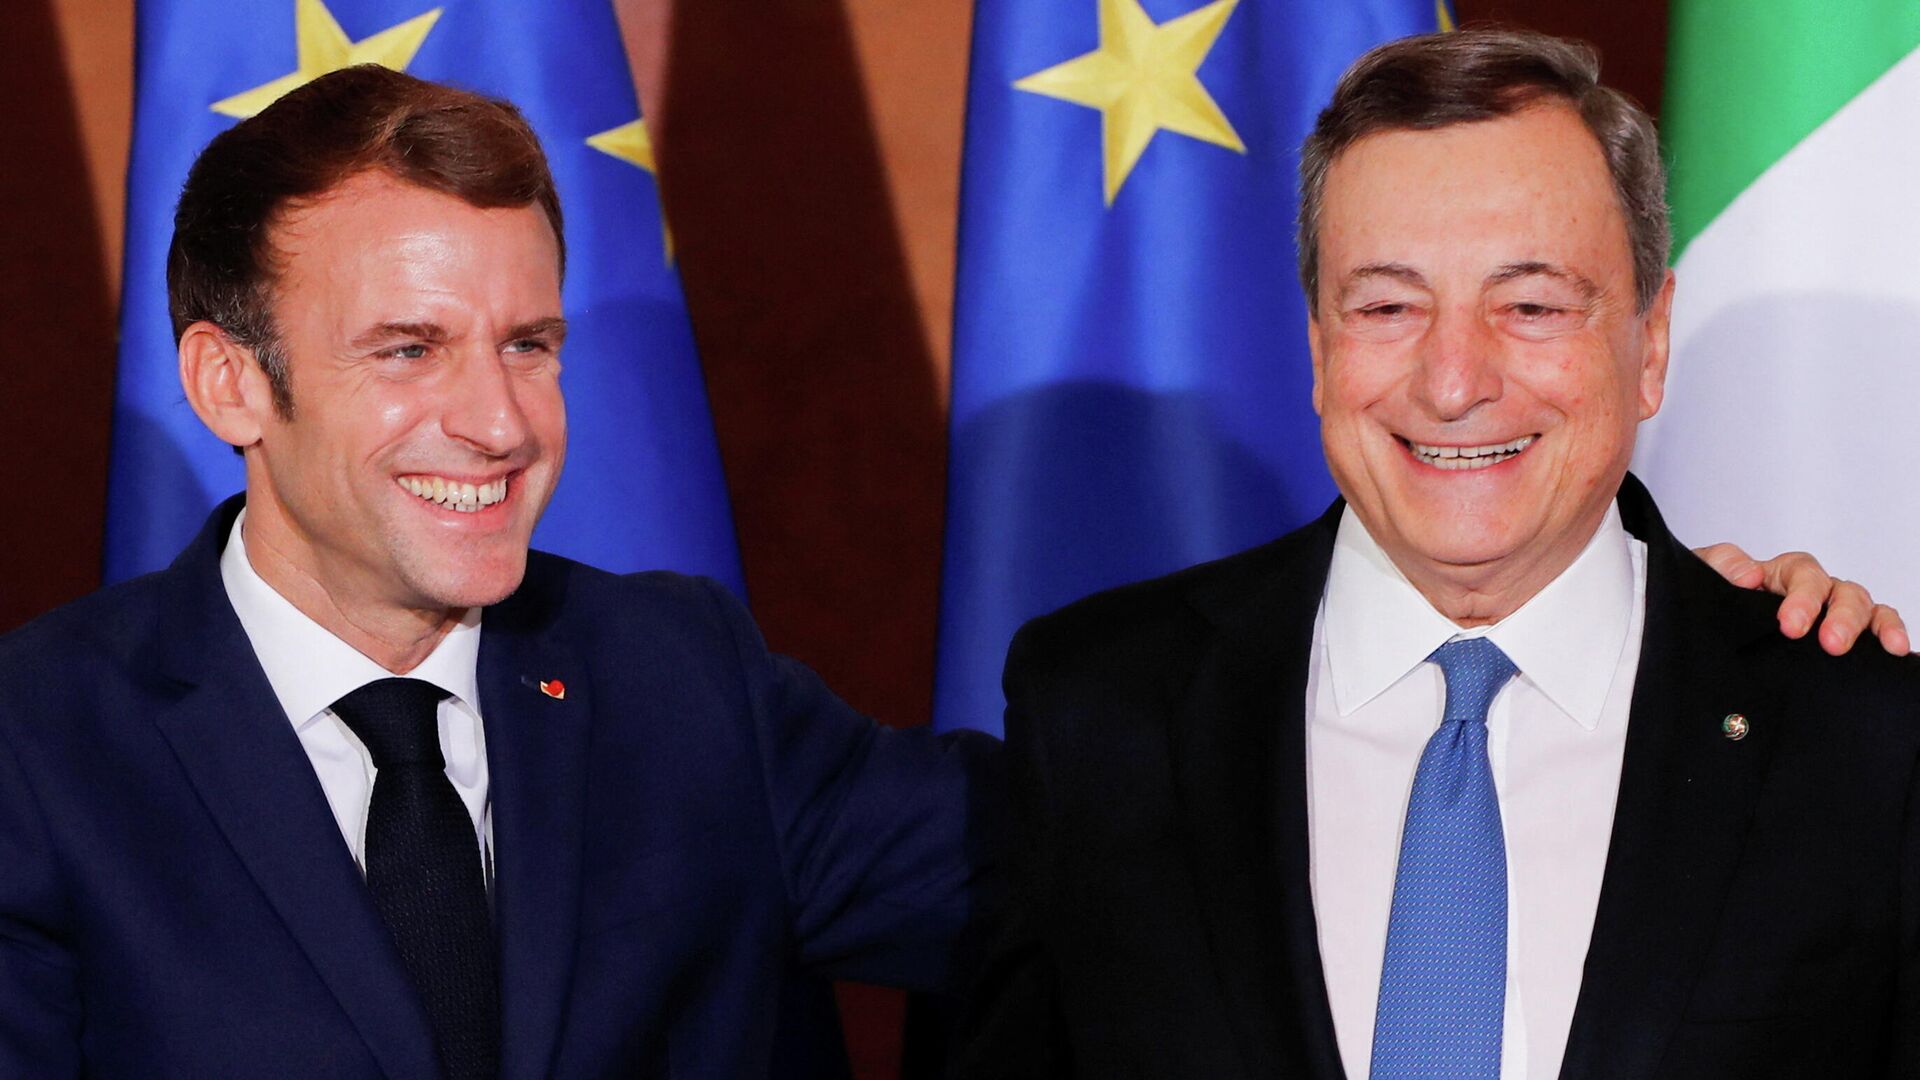 French President Emmanuel Macron and Italy's Prime Minister Mario Draghi smile during a news conference after signing an accord to try to tilt the balance of power in Europe, at Villa Madama in Rome, Italy, November 26, 2021 - Sputnik International, 1920, 23.12.2021